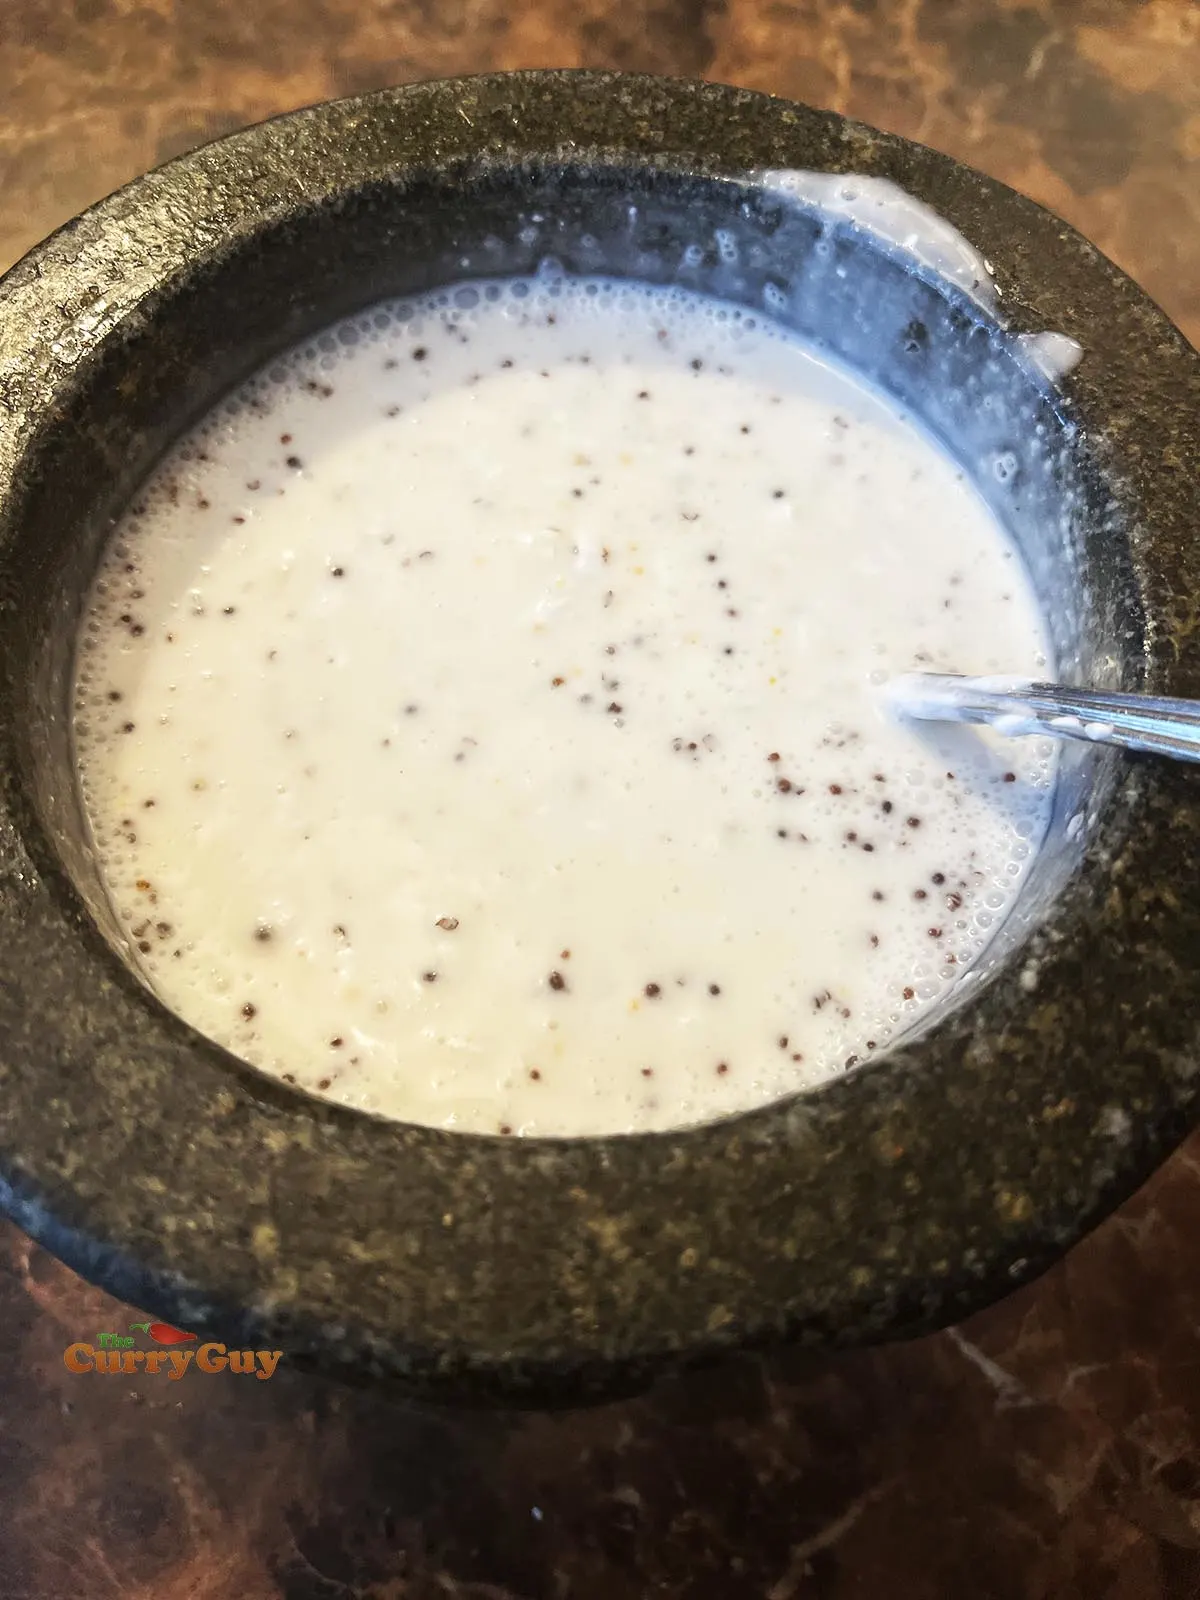 Adding coconut milk to pestle and mortar ingredients